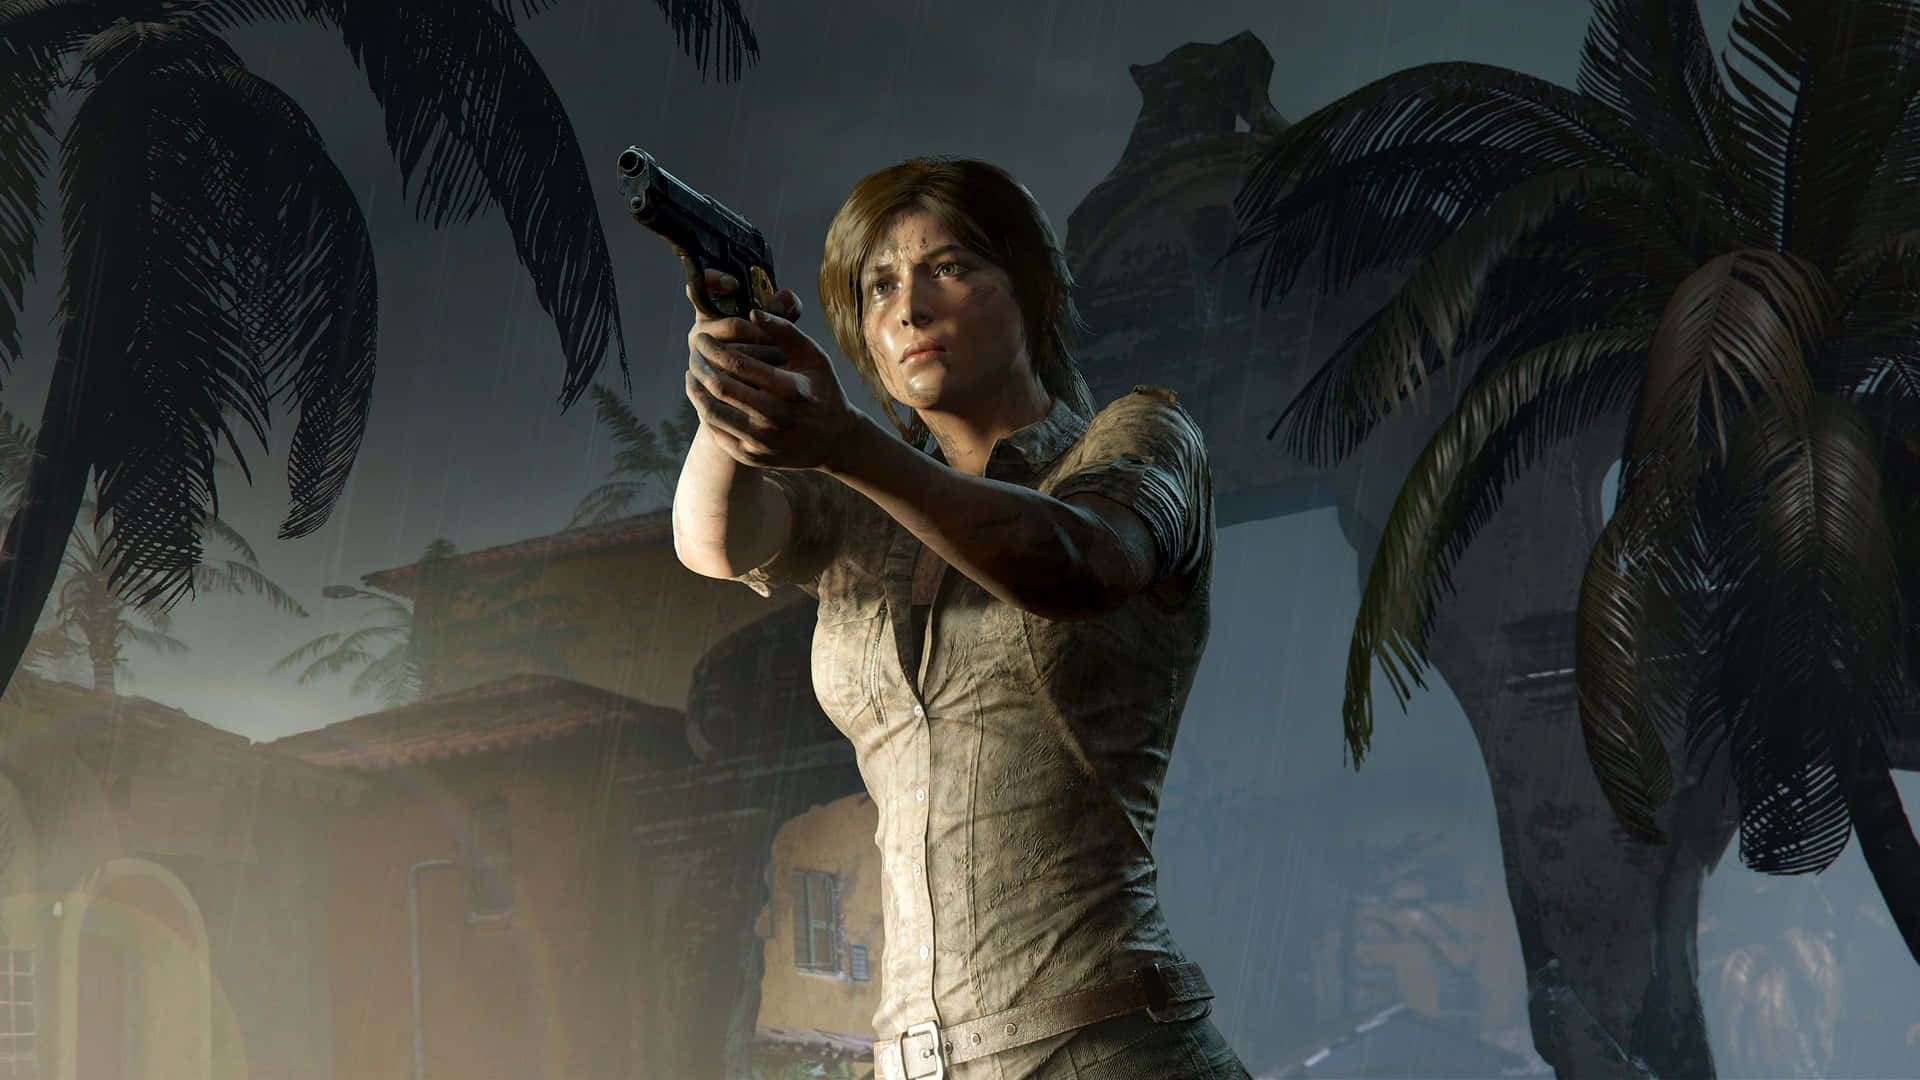 Lara Croft, The Iconic Adventurer, Explores The Mystery Of The Jungle In Shadow Of The Tomb Raider Background